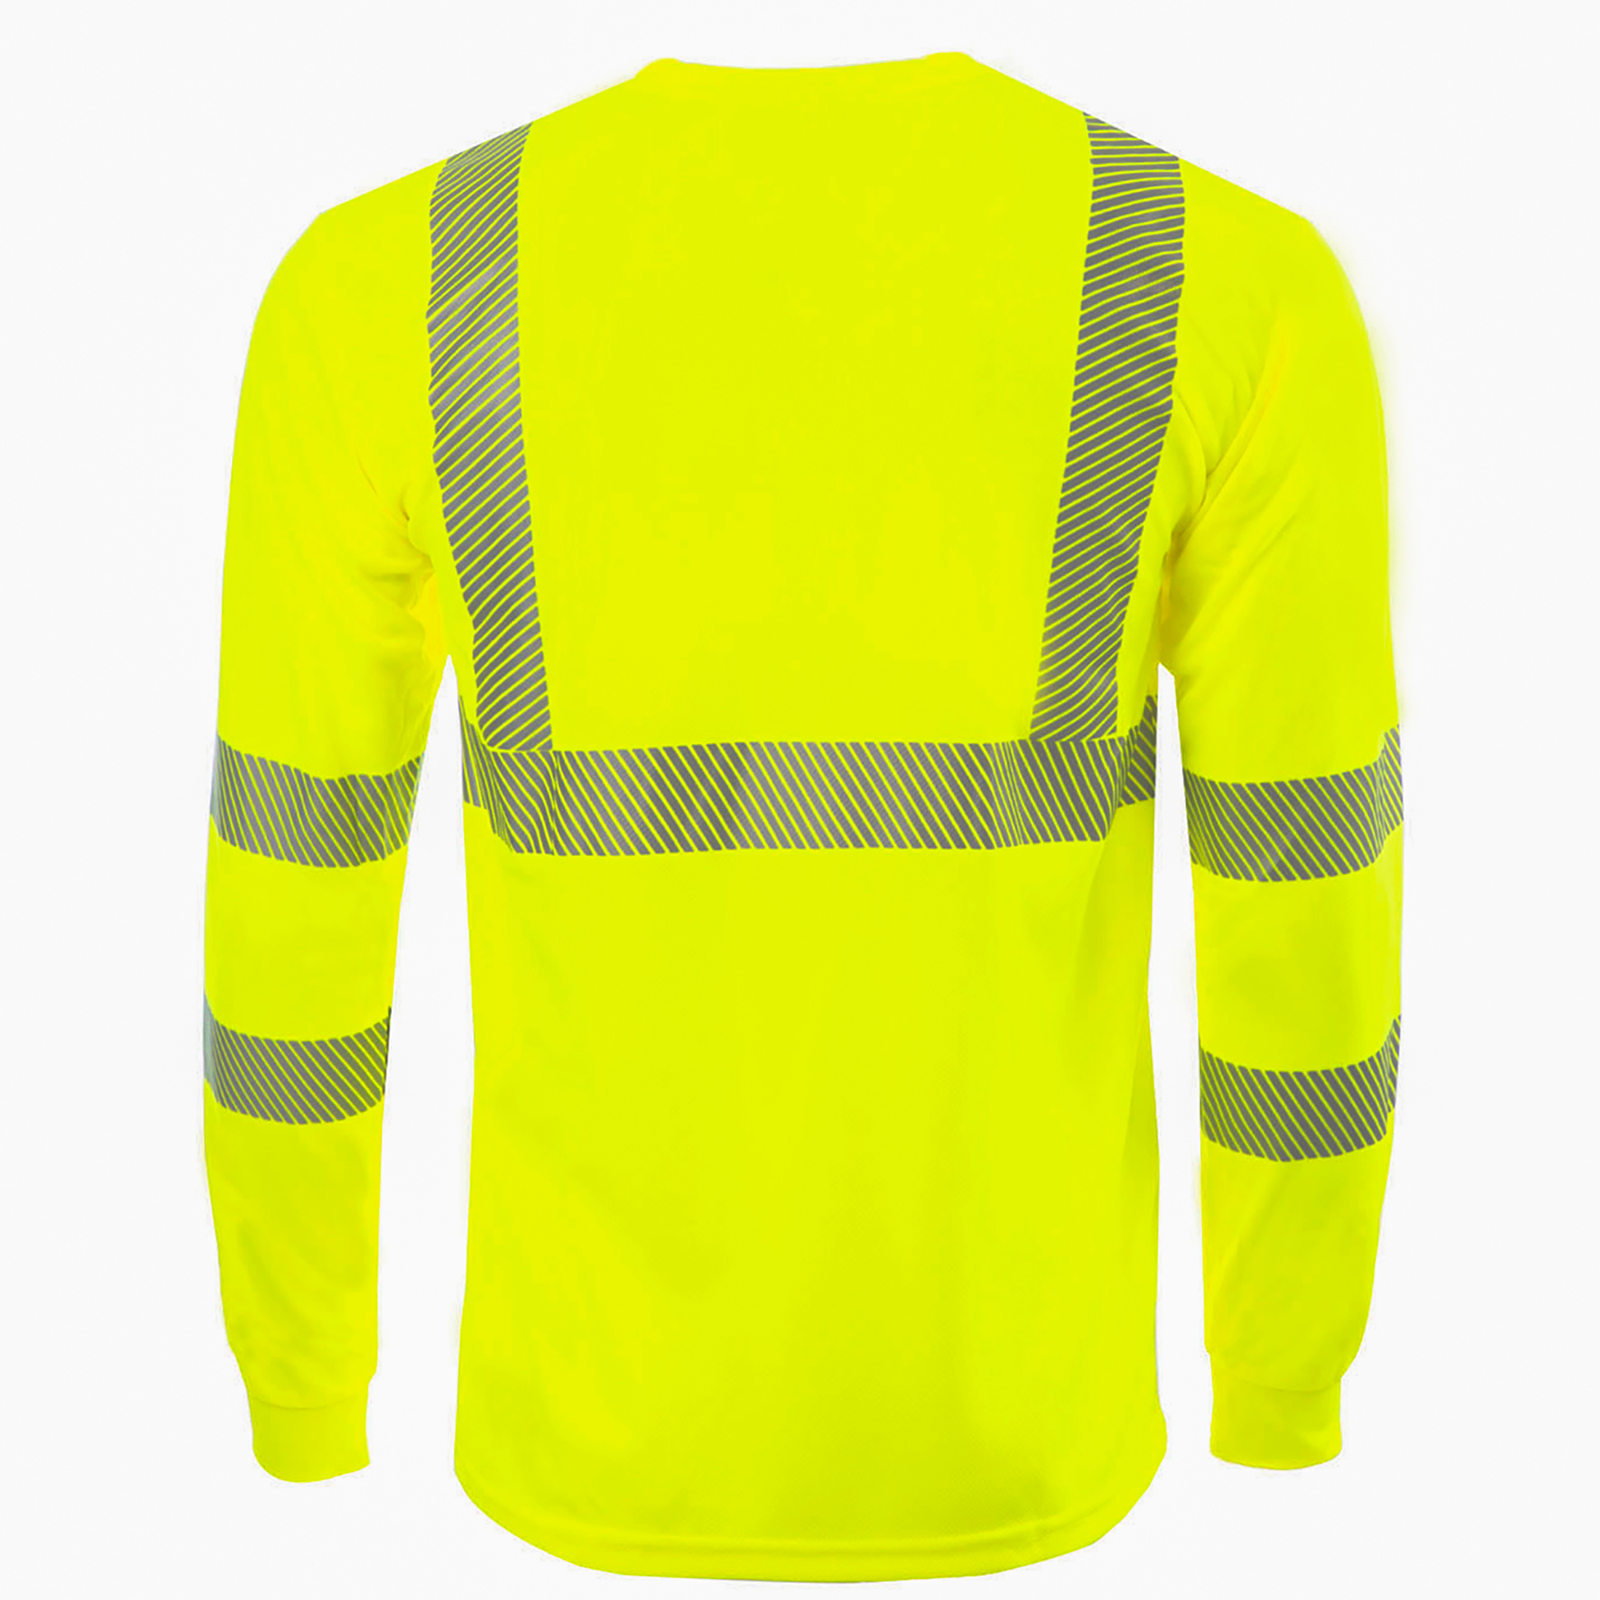 Back of the Hi-Vis yellow/lime heat transfer reflective long sleeve safety pocket shirt